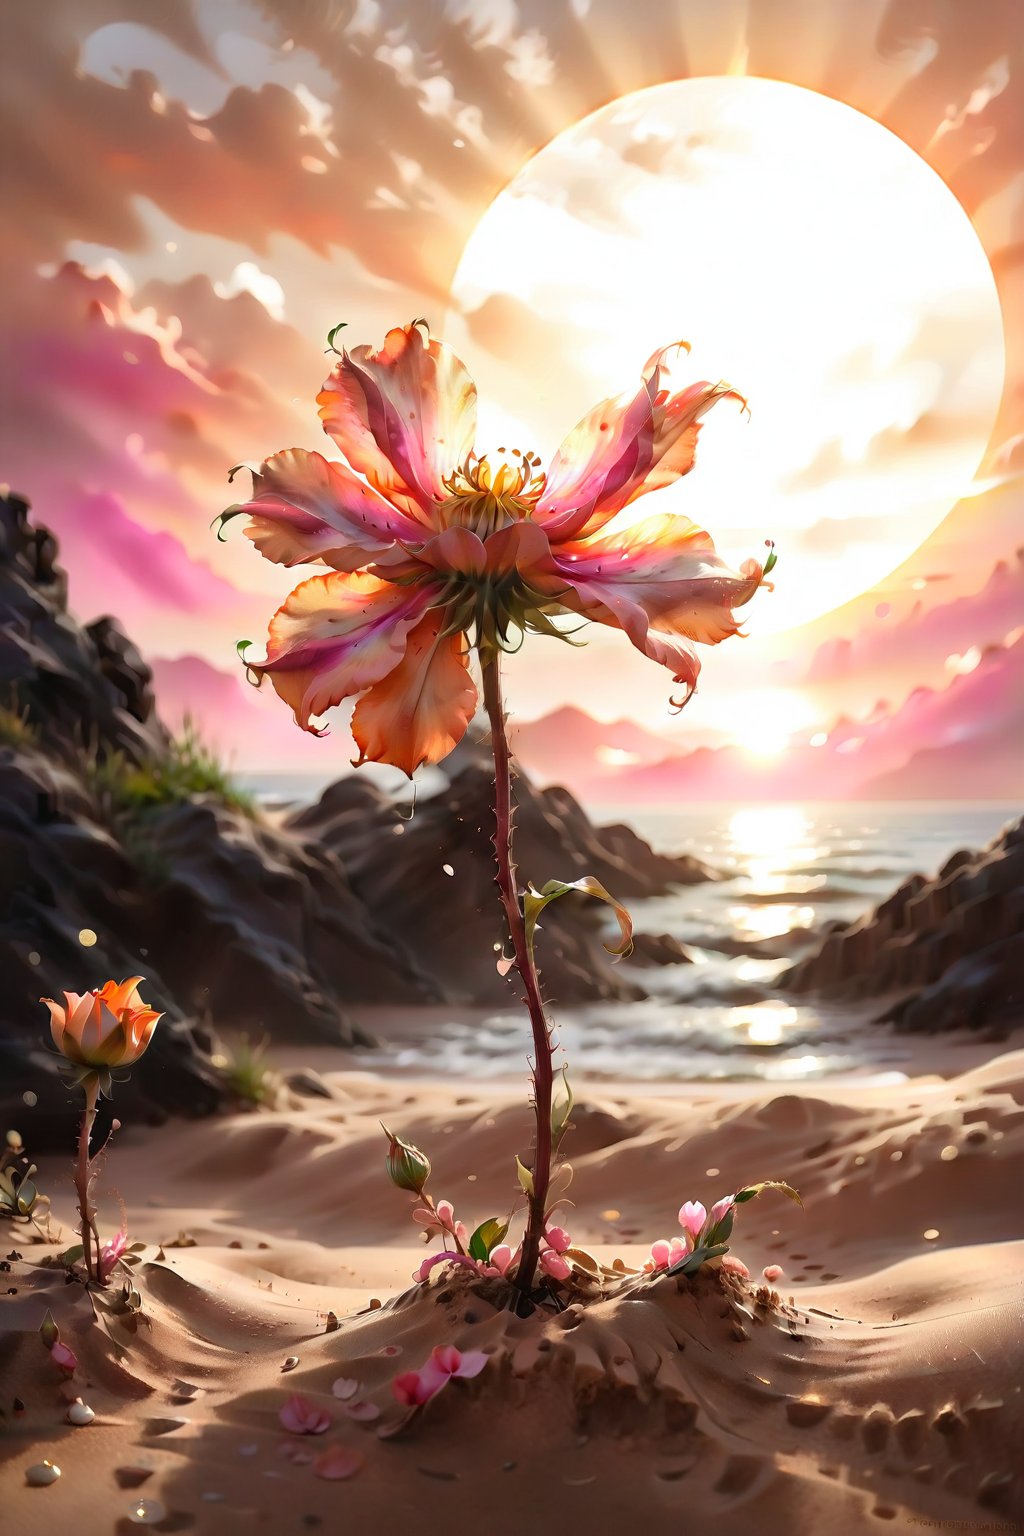 Soft focus captures the whimsical moment: a waning watercolor flower, its petals unfolding like a gentle sigh, floats effortlessly across a sun-weathered sandy dune. The stem stretches towards the setting sun, where vibrant orange and pink hues radiate